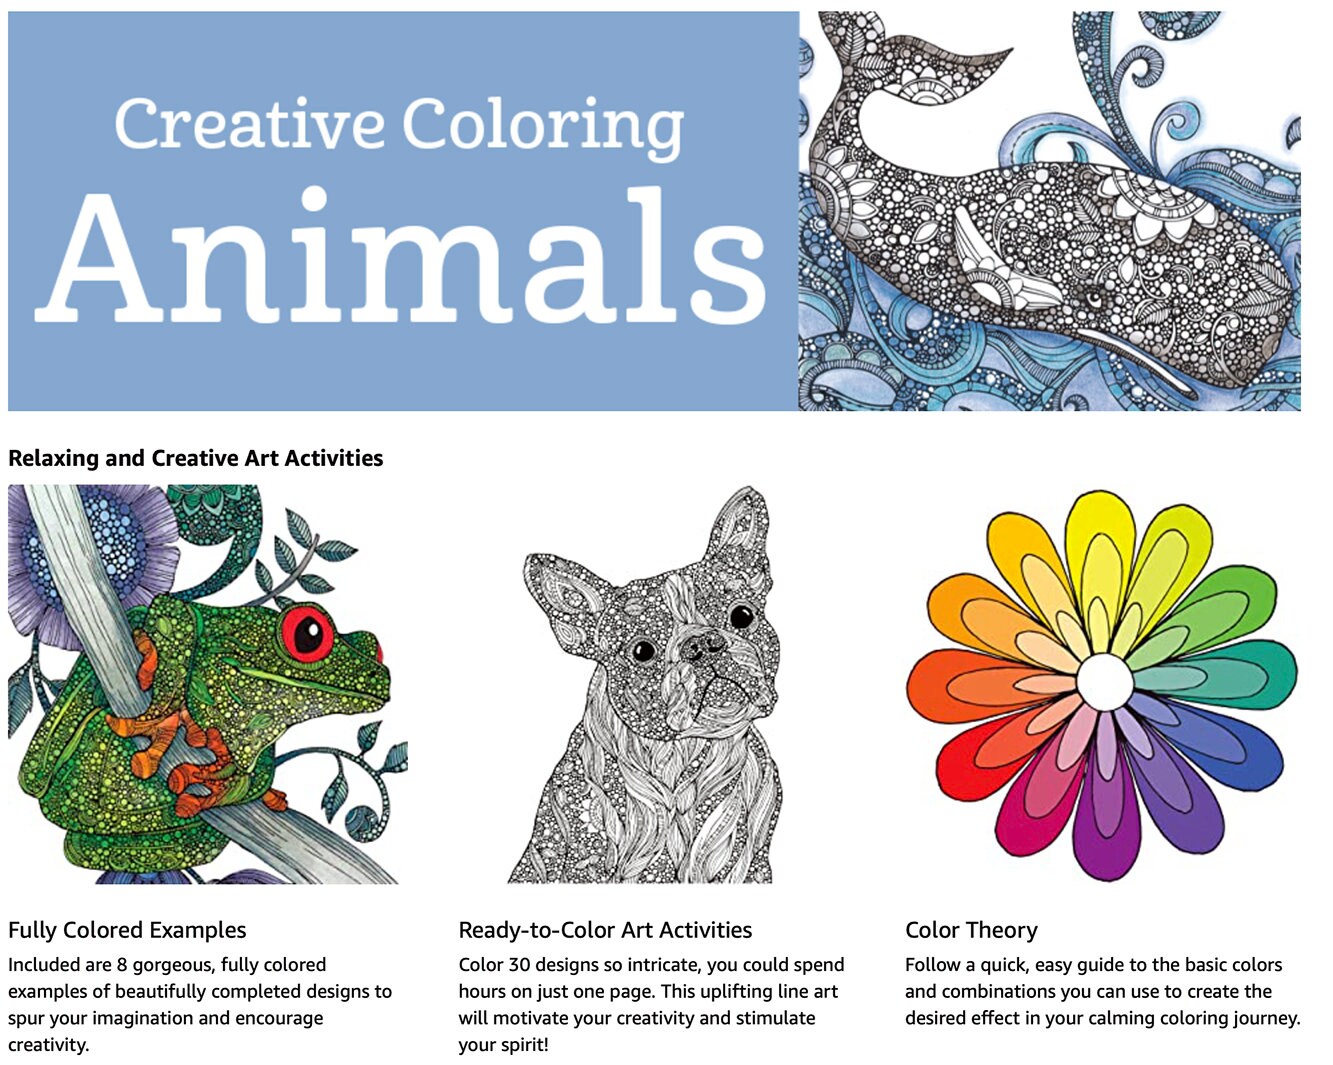 12 Mythographic/animals ideas  coloring books, adult coloring